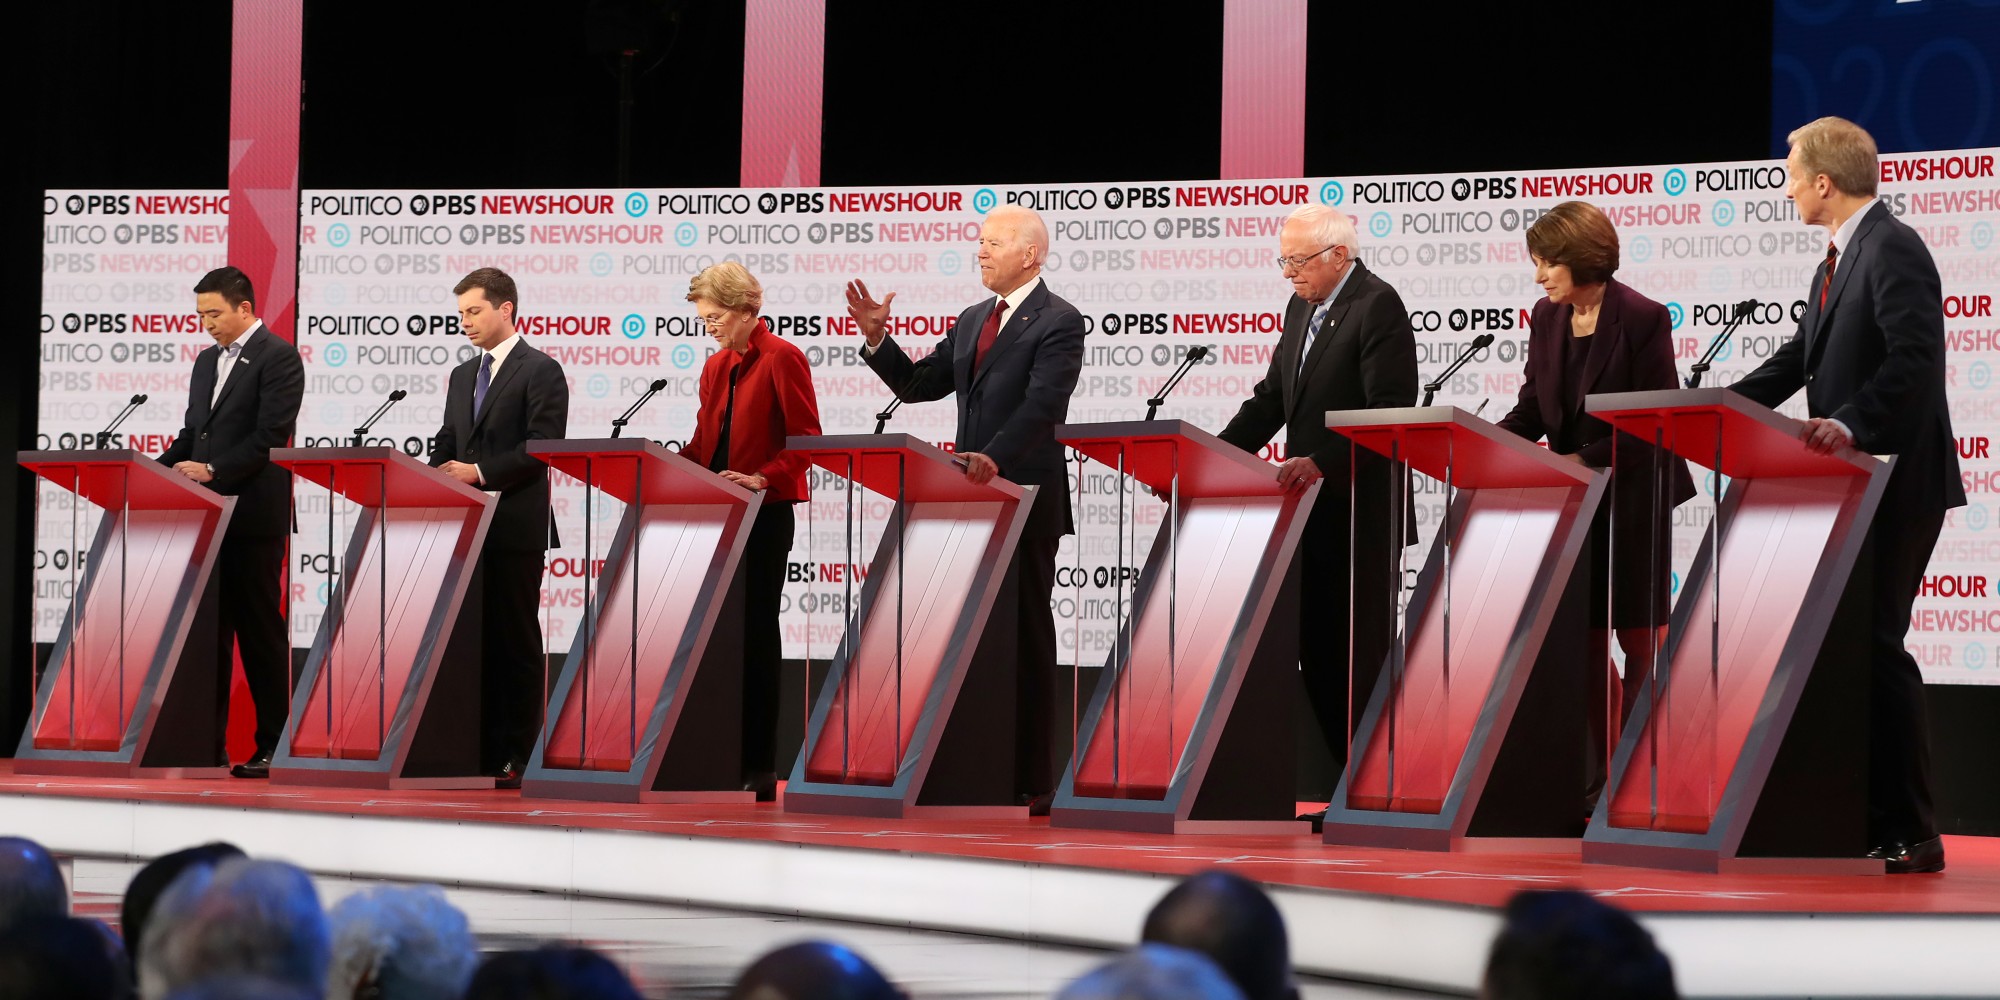 Full Video: Watch The PBS NewsHour Politico Democratic Debate - Election Central